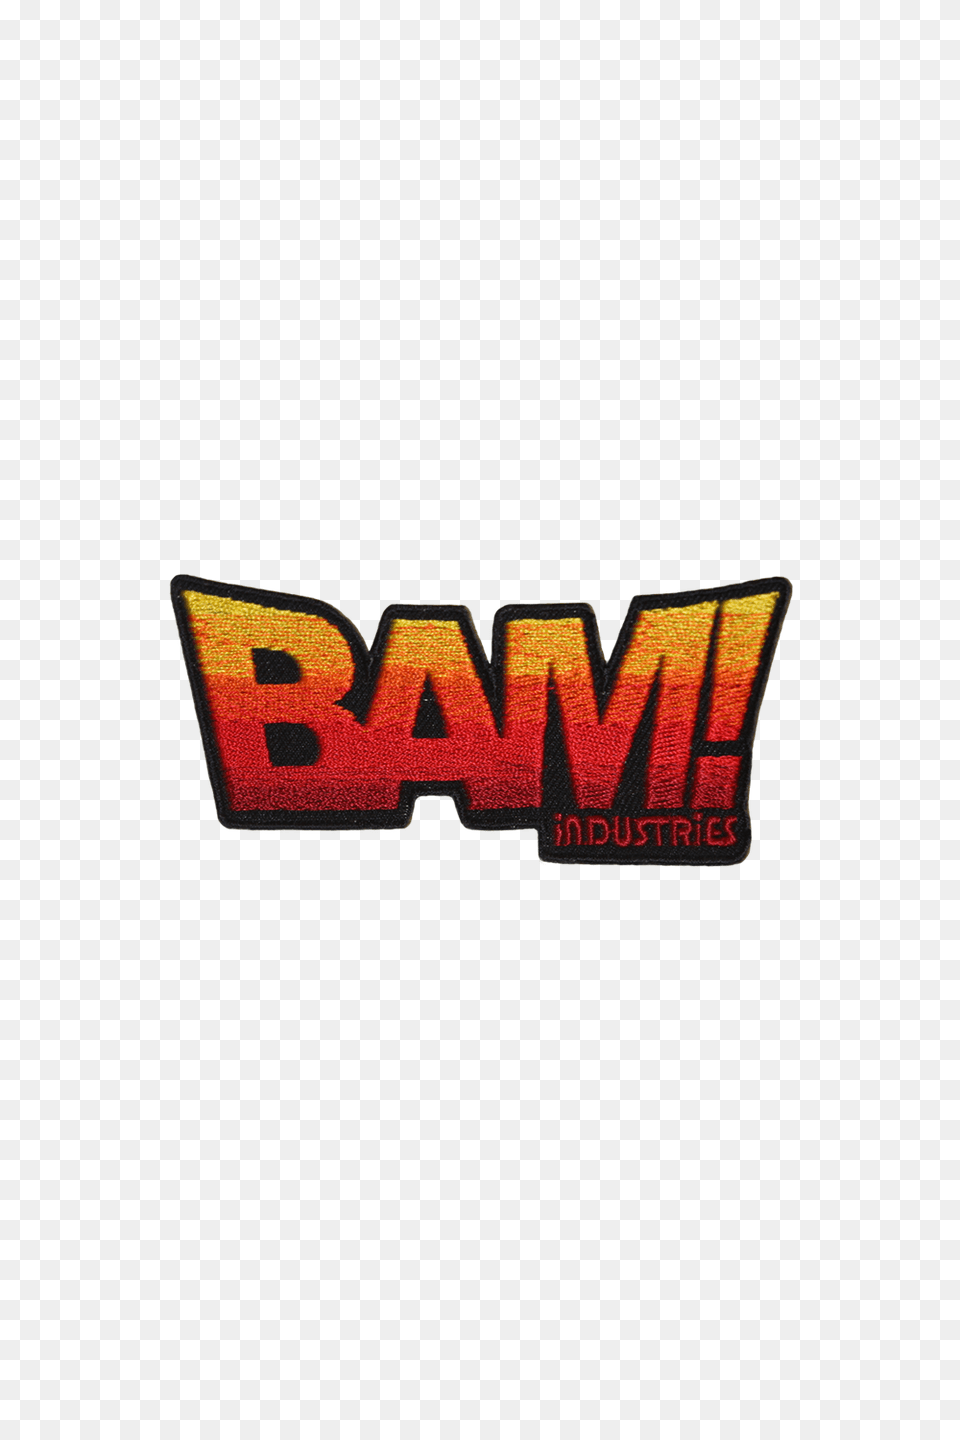 Bam Fire Patch Bam Industries, Logo, Symbol Free Png Download